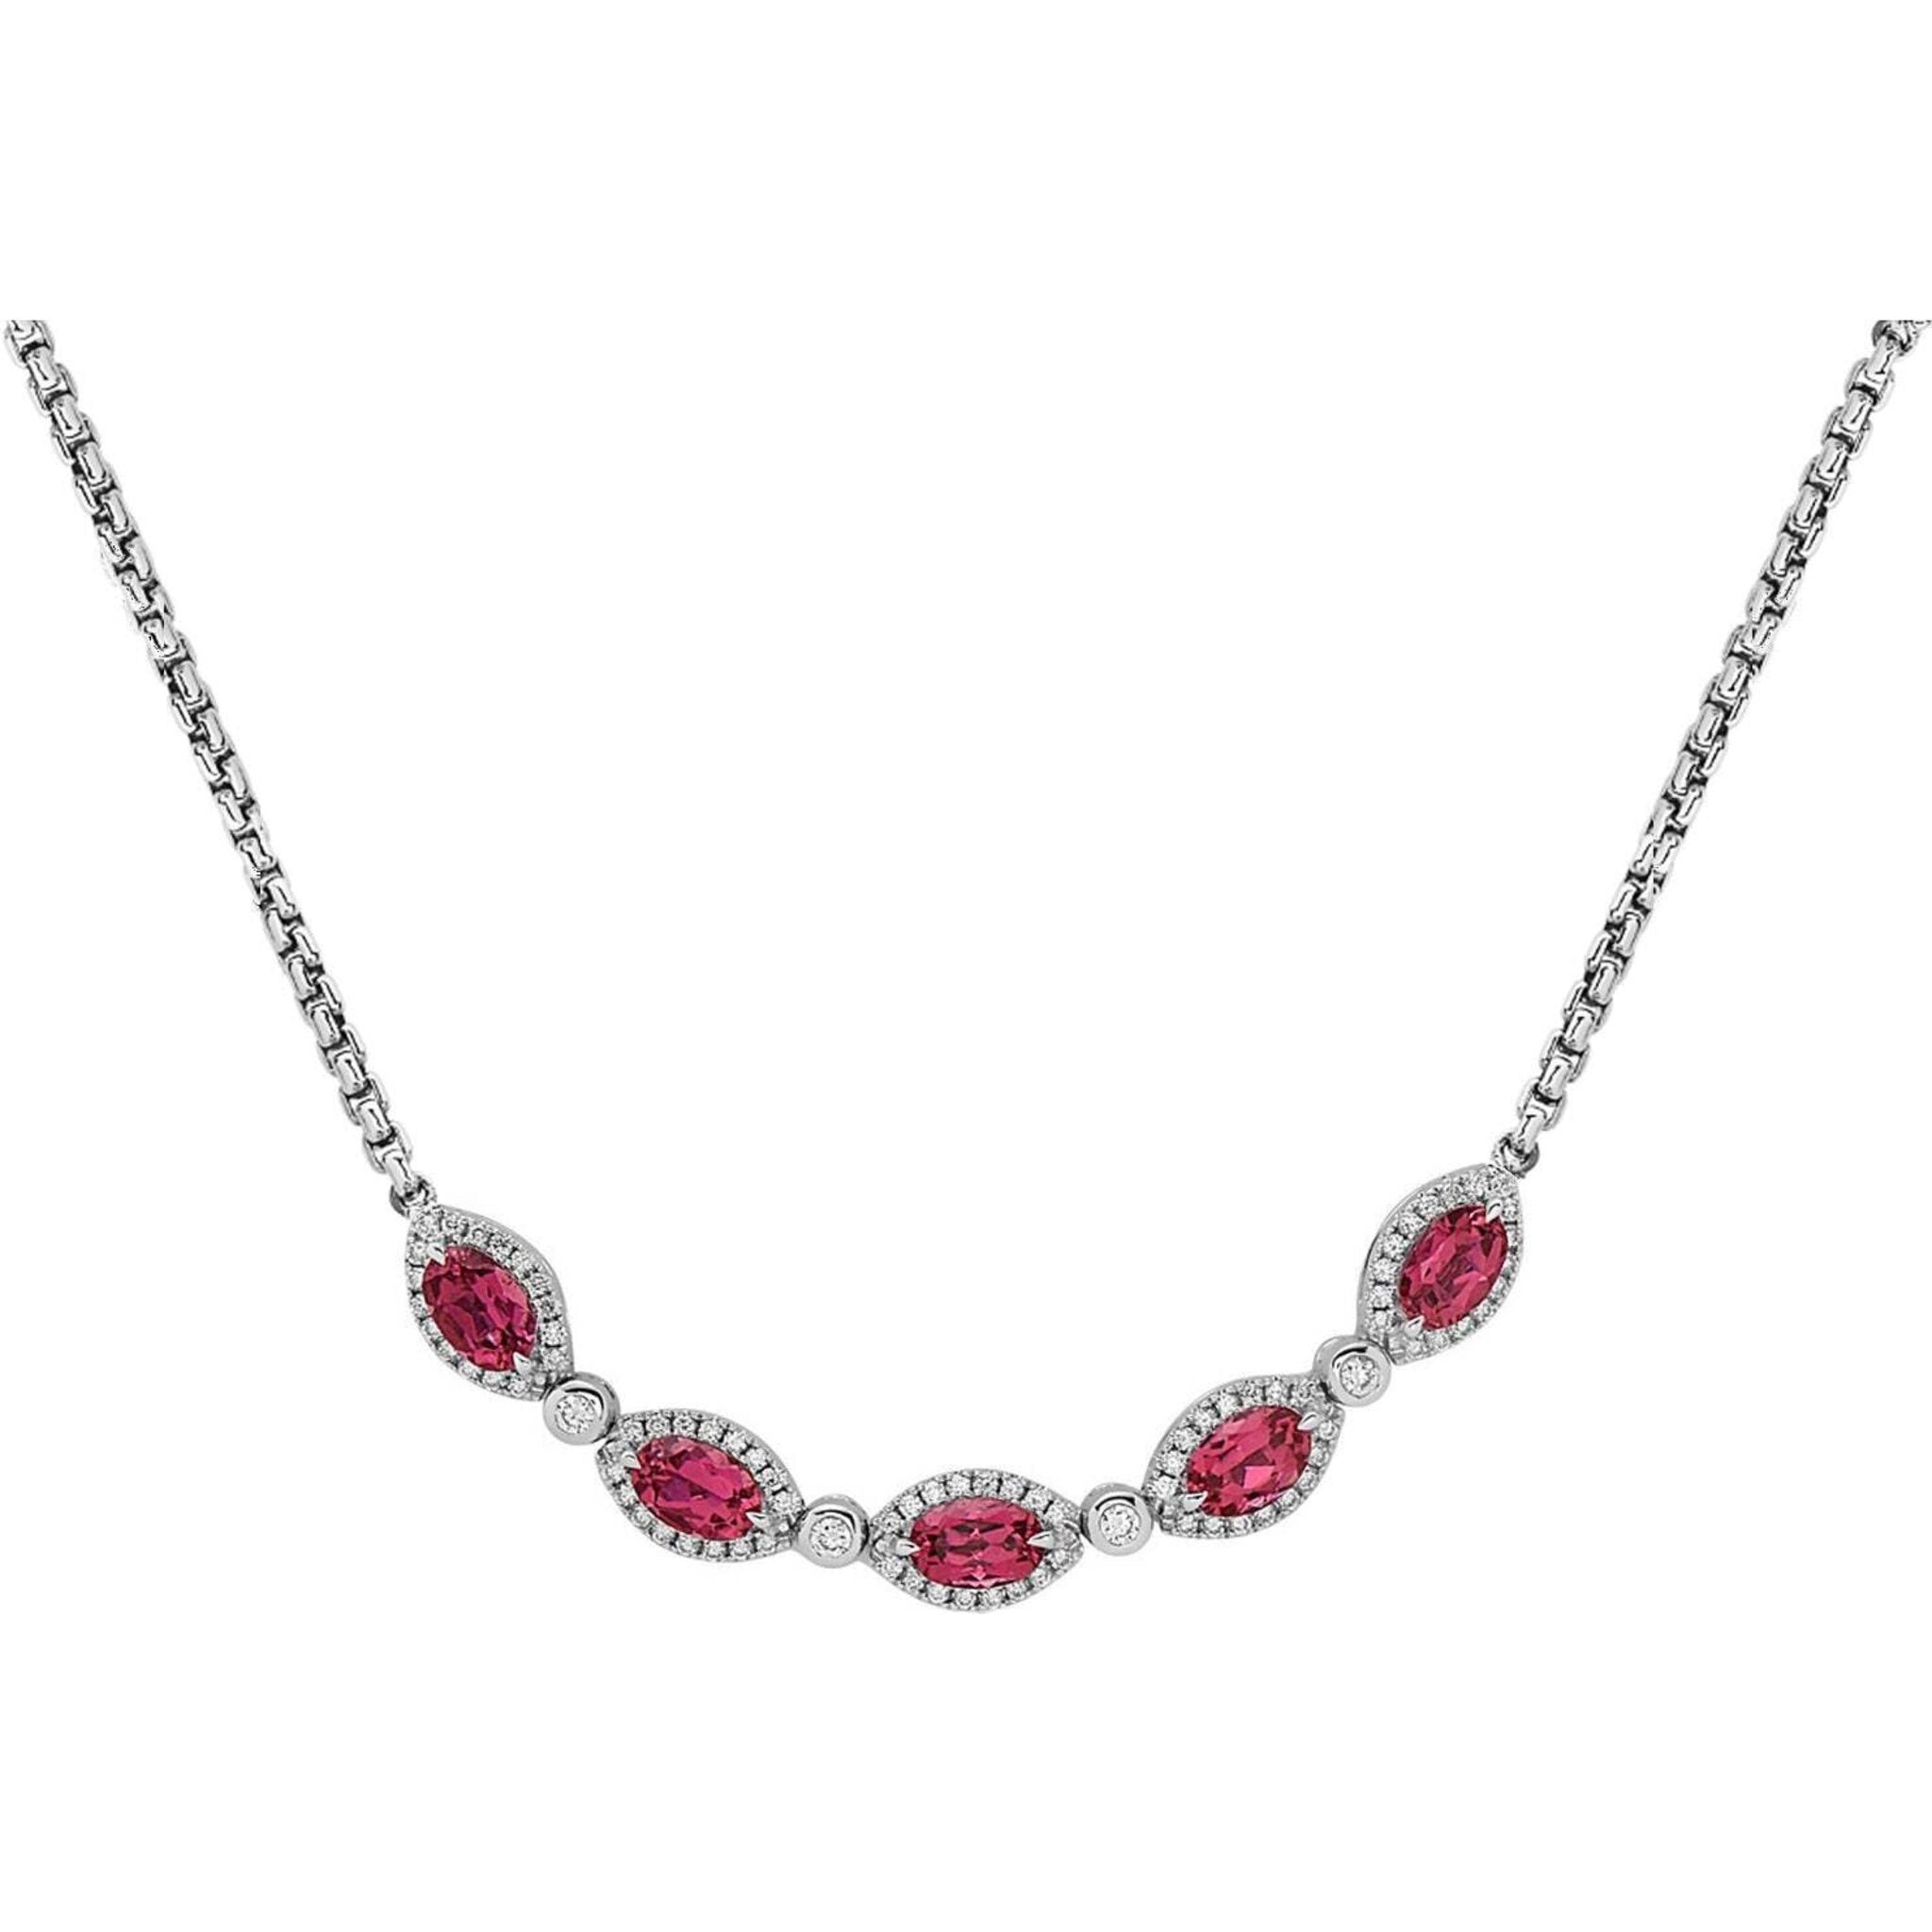 Charles Krypell - Diamond Firefly Marquise Necklace - Rubellite